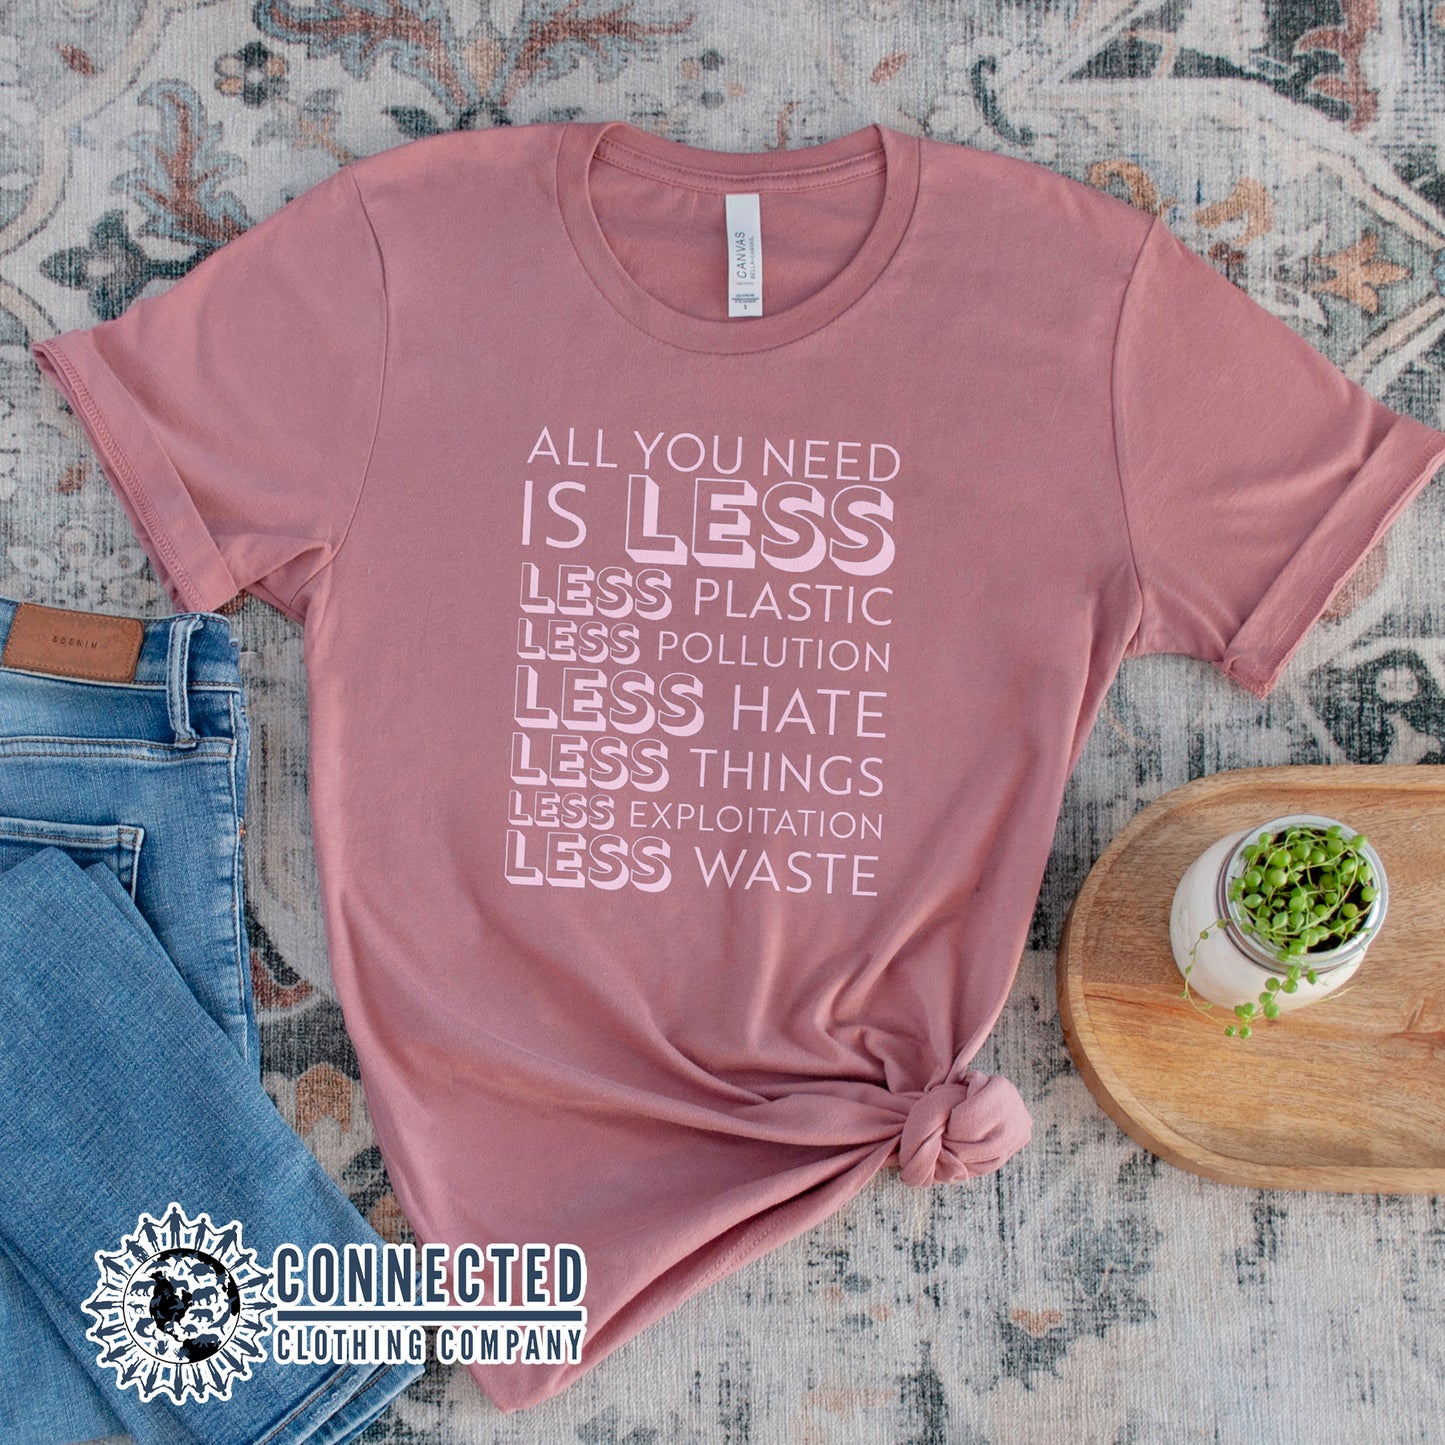 Mauve All You Need Is Less Short-Sleeve Unisex Tee reads "all you need is less. less plastic. less pollution. less hate. less things. less exploitation. less waste." - sweetsherriloudesigns - Ethically and Sustainably Made - 10% of profits donated to Mission Blue ocean conservation